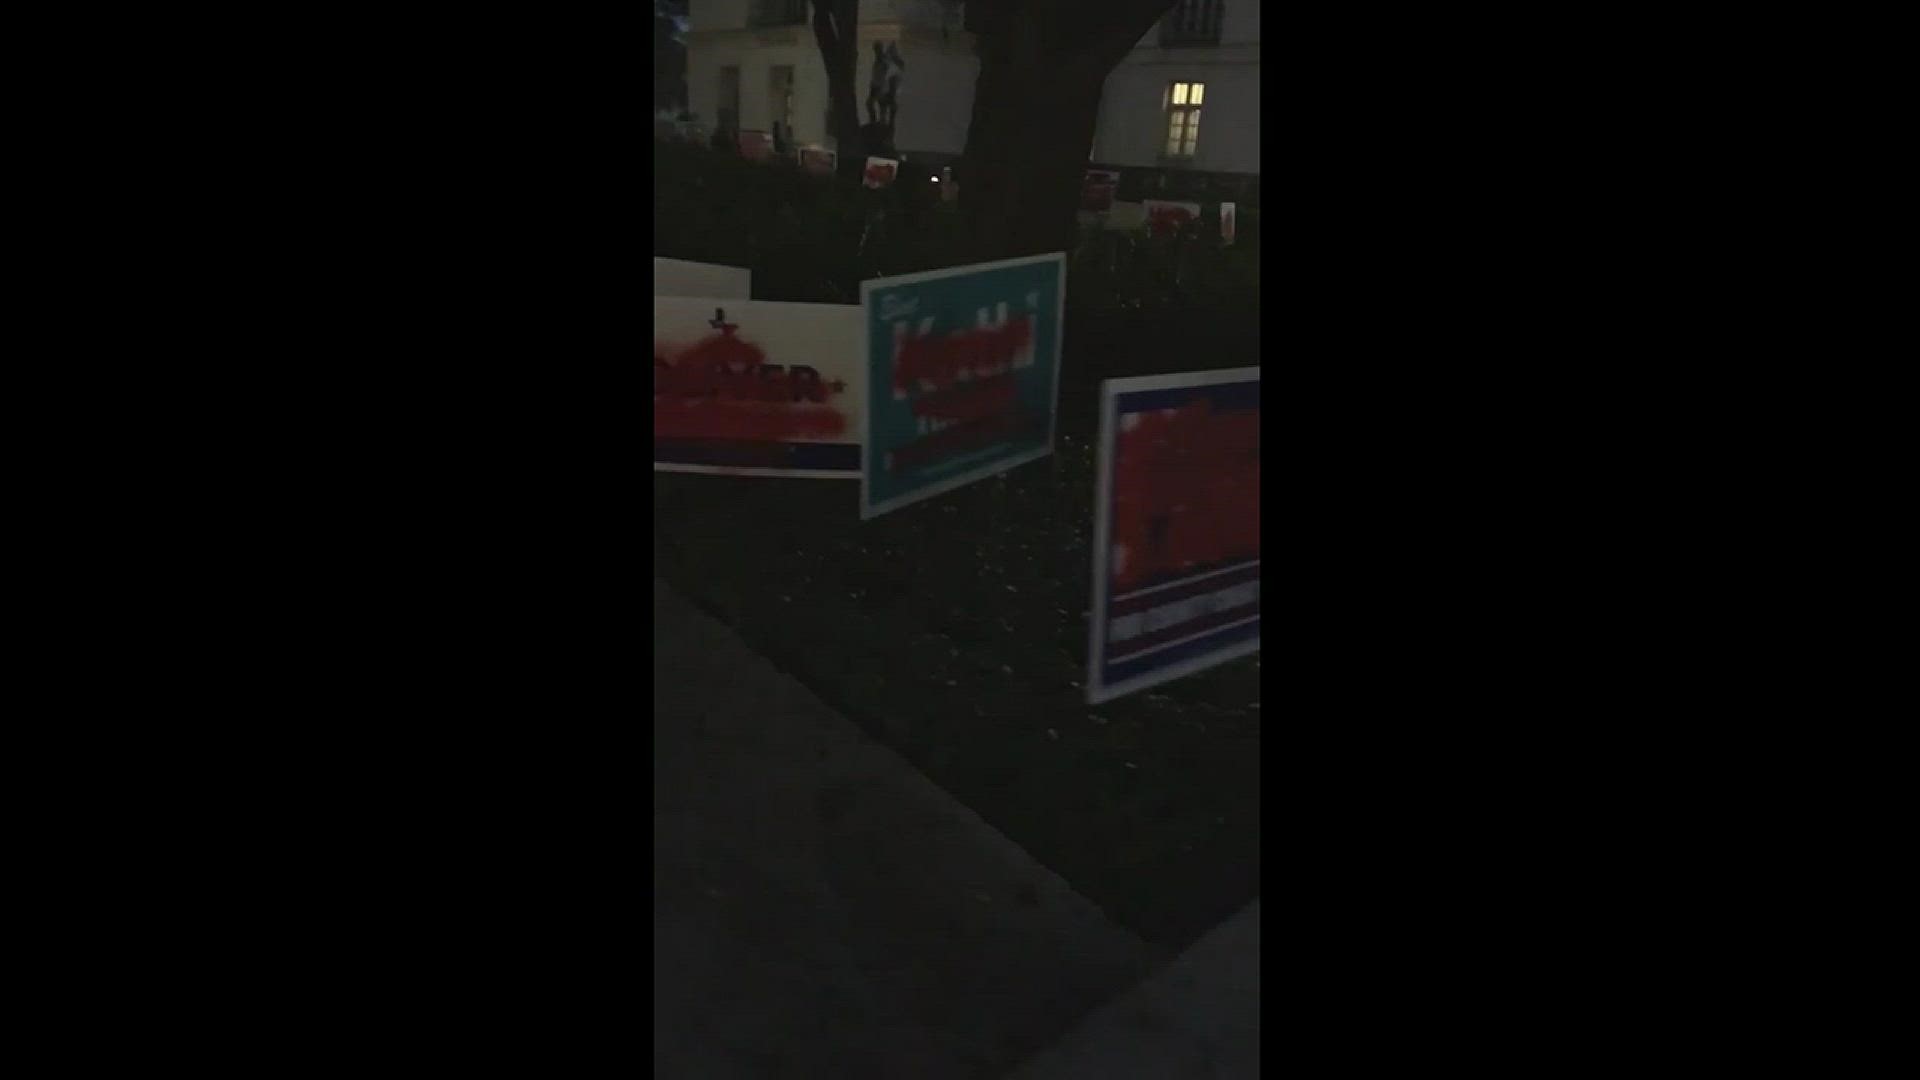 Political signs vandalized on UT campus, police say